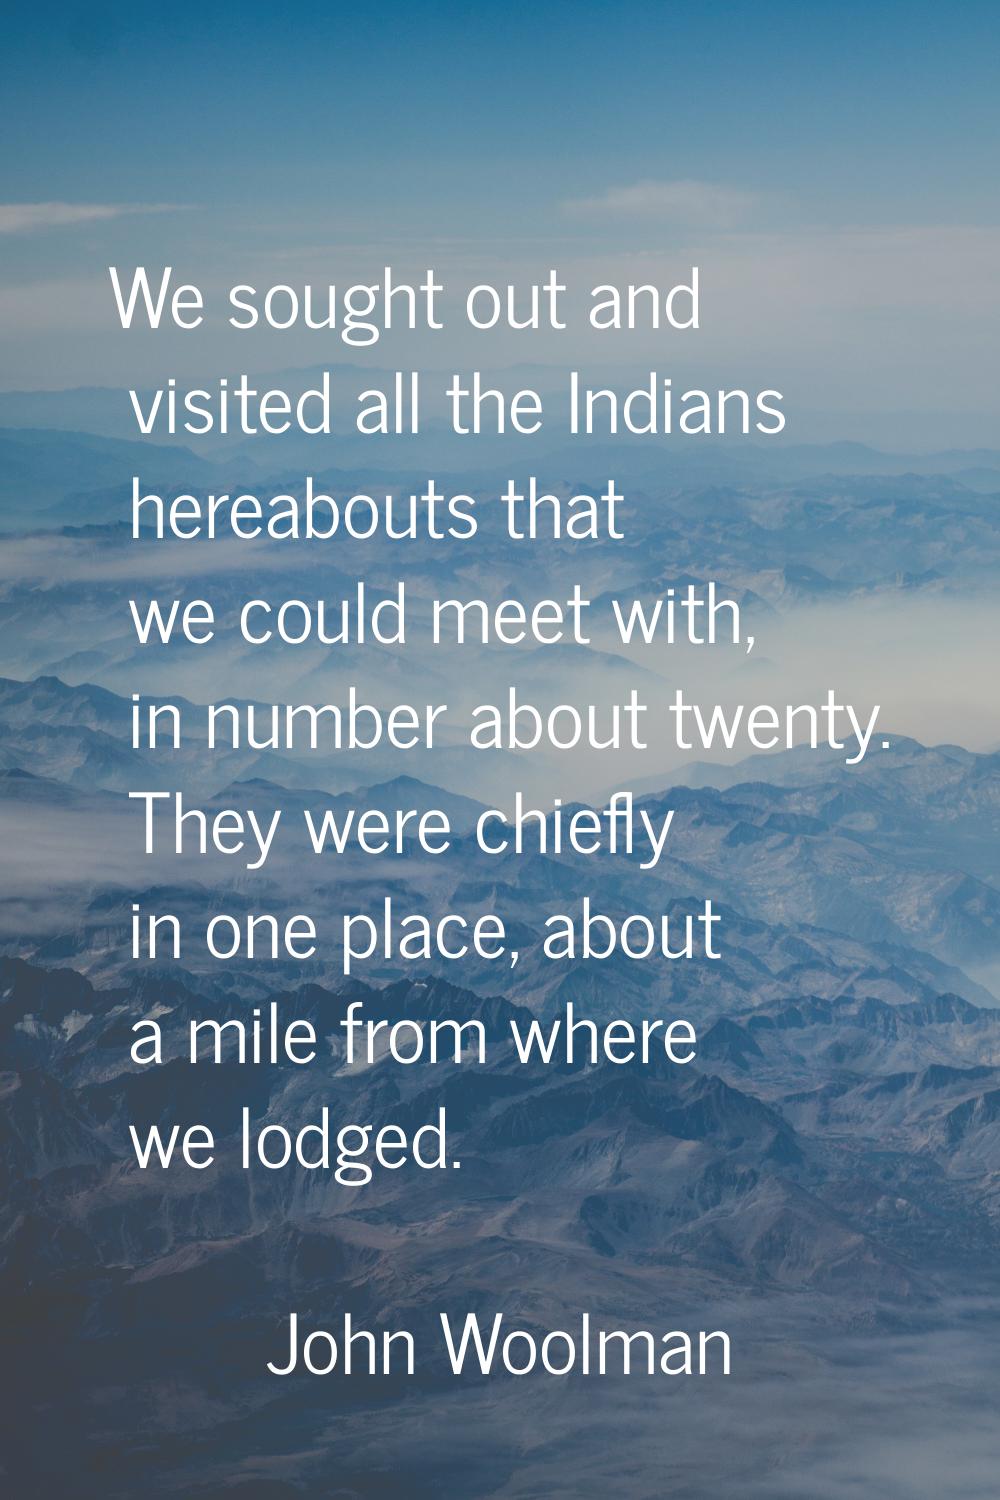 We sought out and visited all the Indians hereabouts that we could meet with, in number about twent